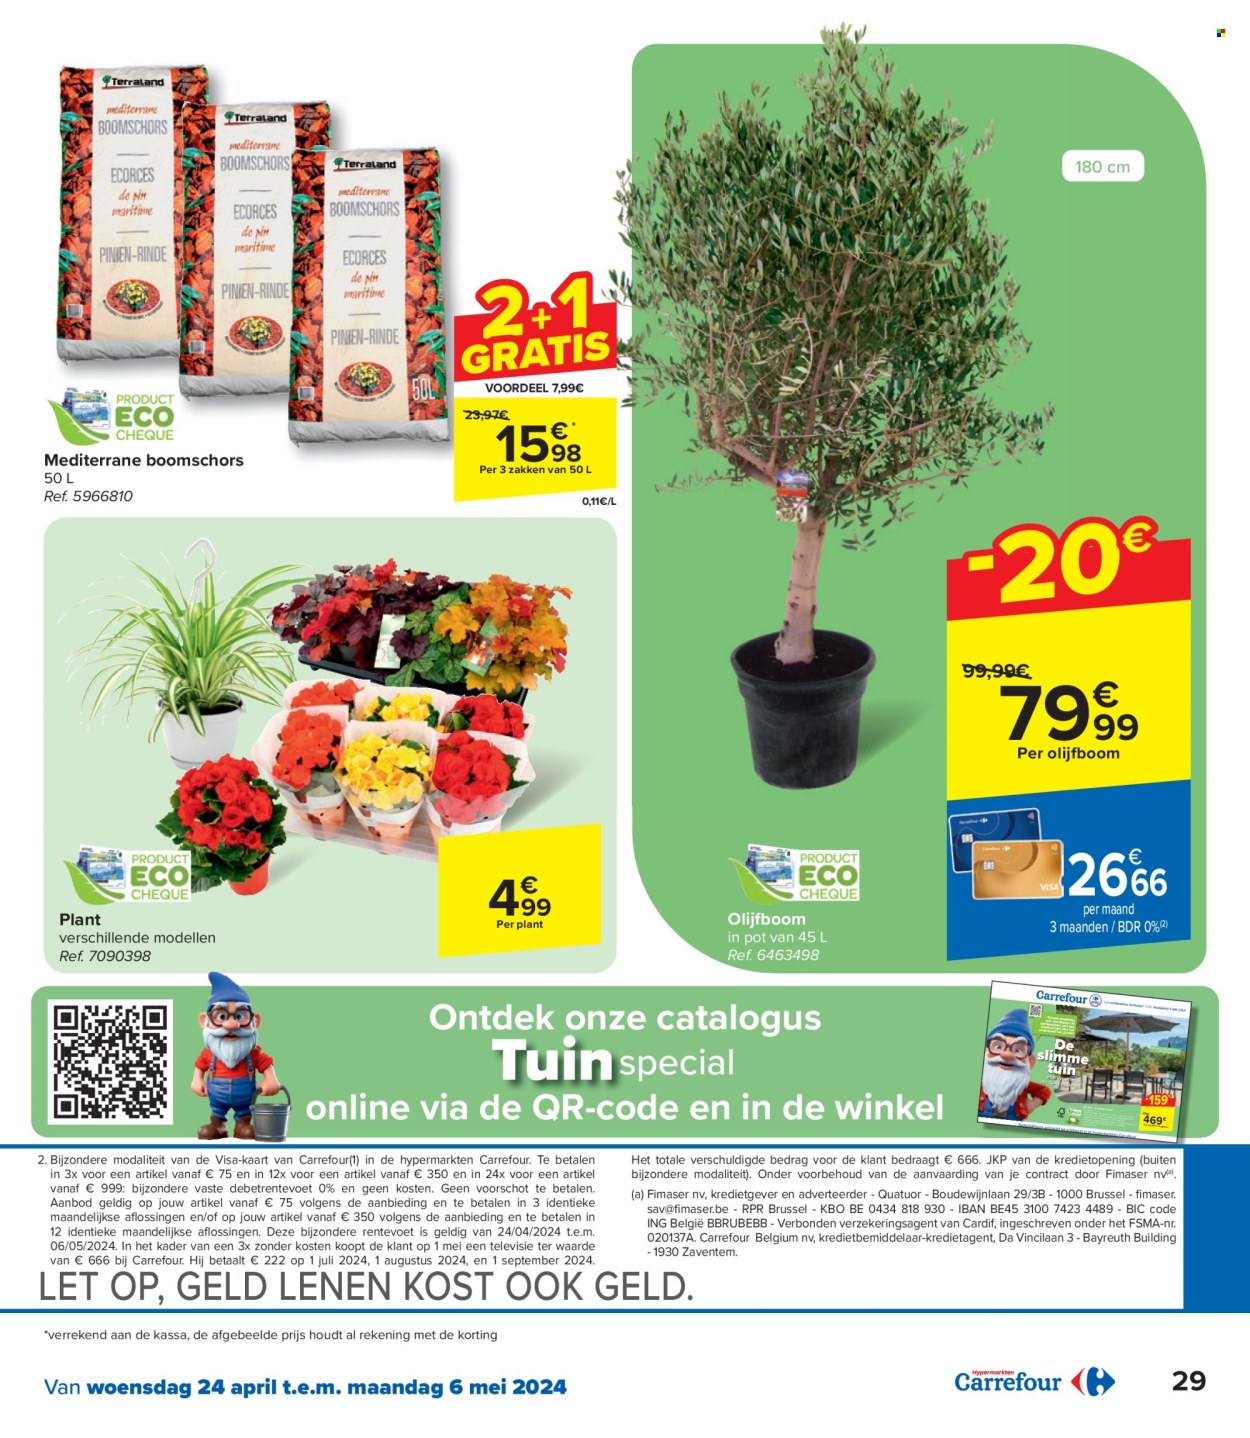 Catalogue Carrefour hypermarkt - 24.4.2024 - 6.5.2024. Page 29.